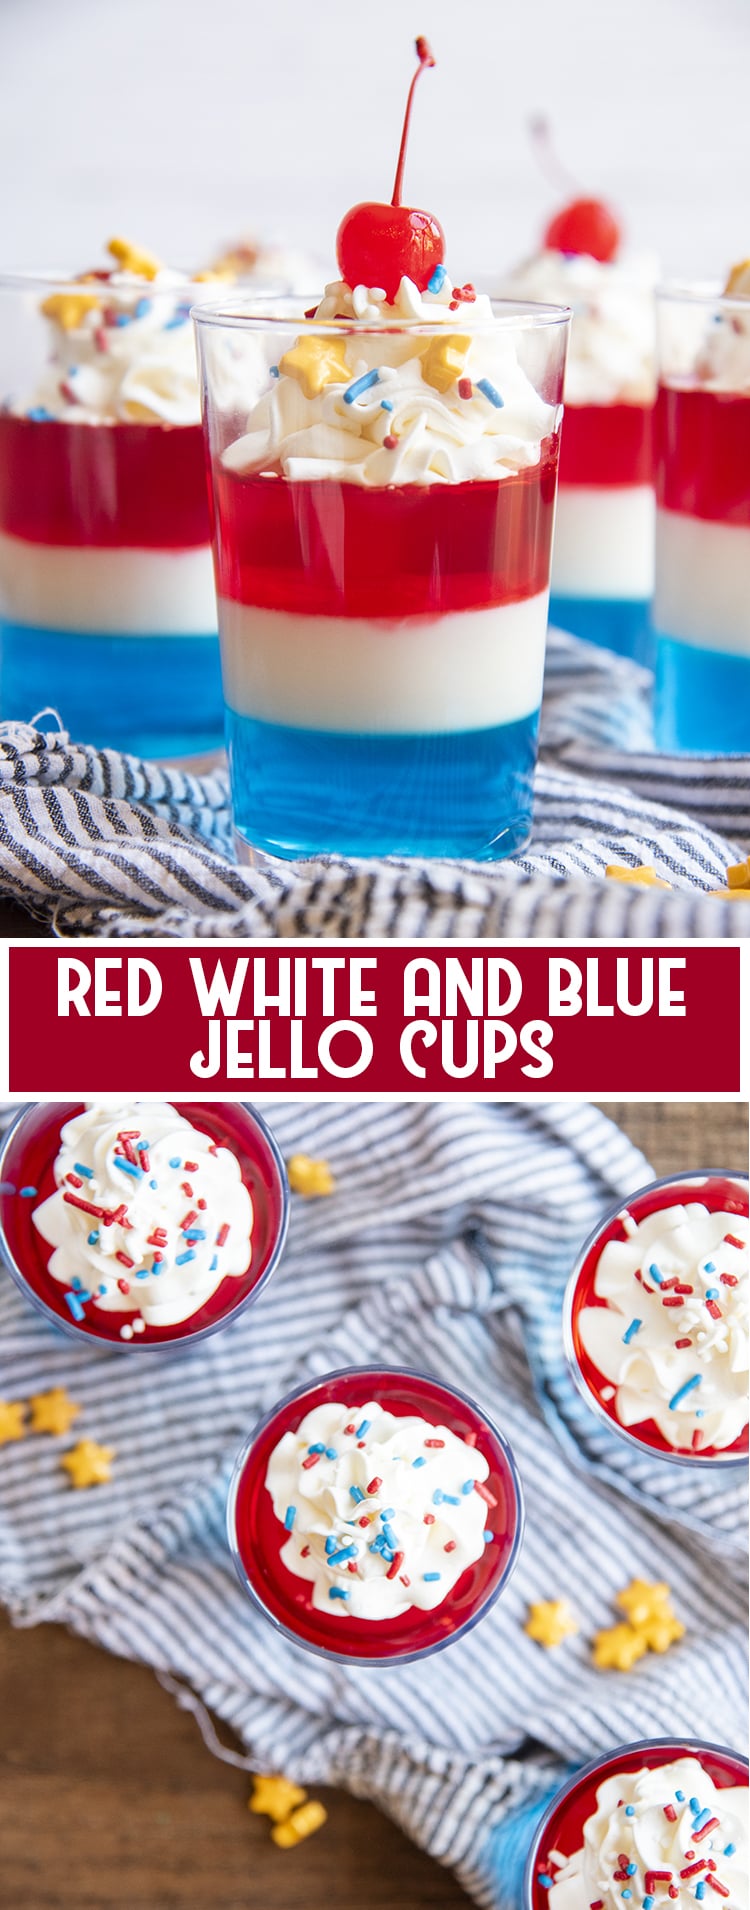 Layers of Red White and Blue Jello in a cup with whipped cream and a cherry on top with text overlay for pinterest